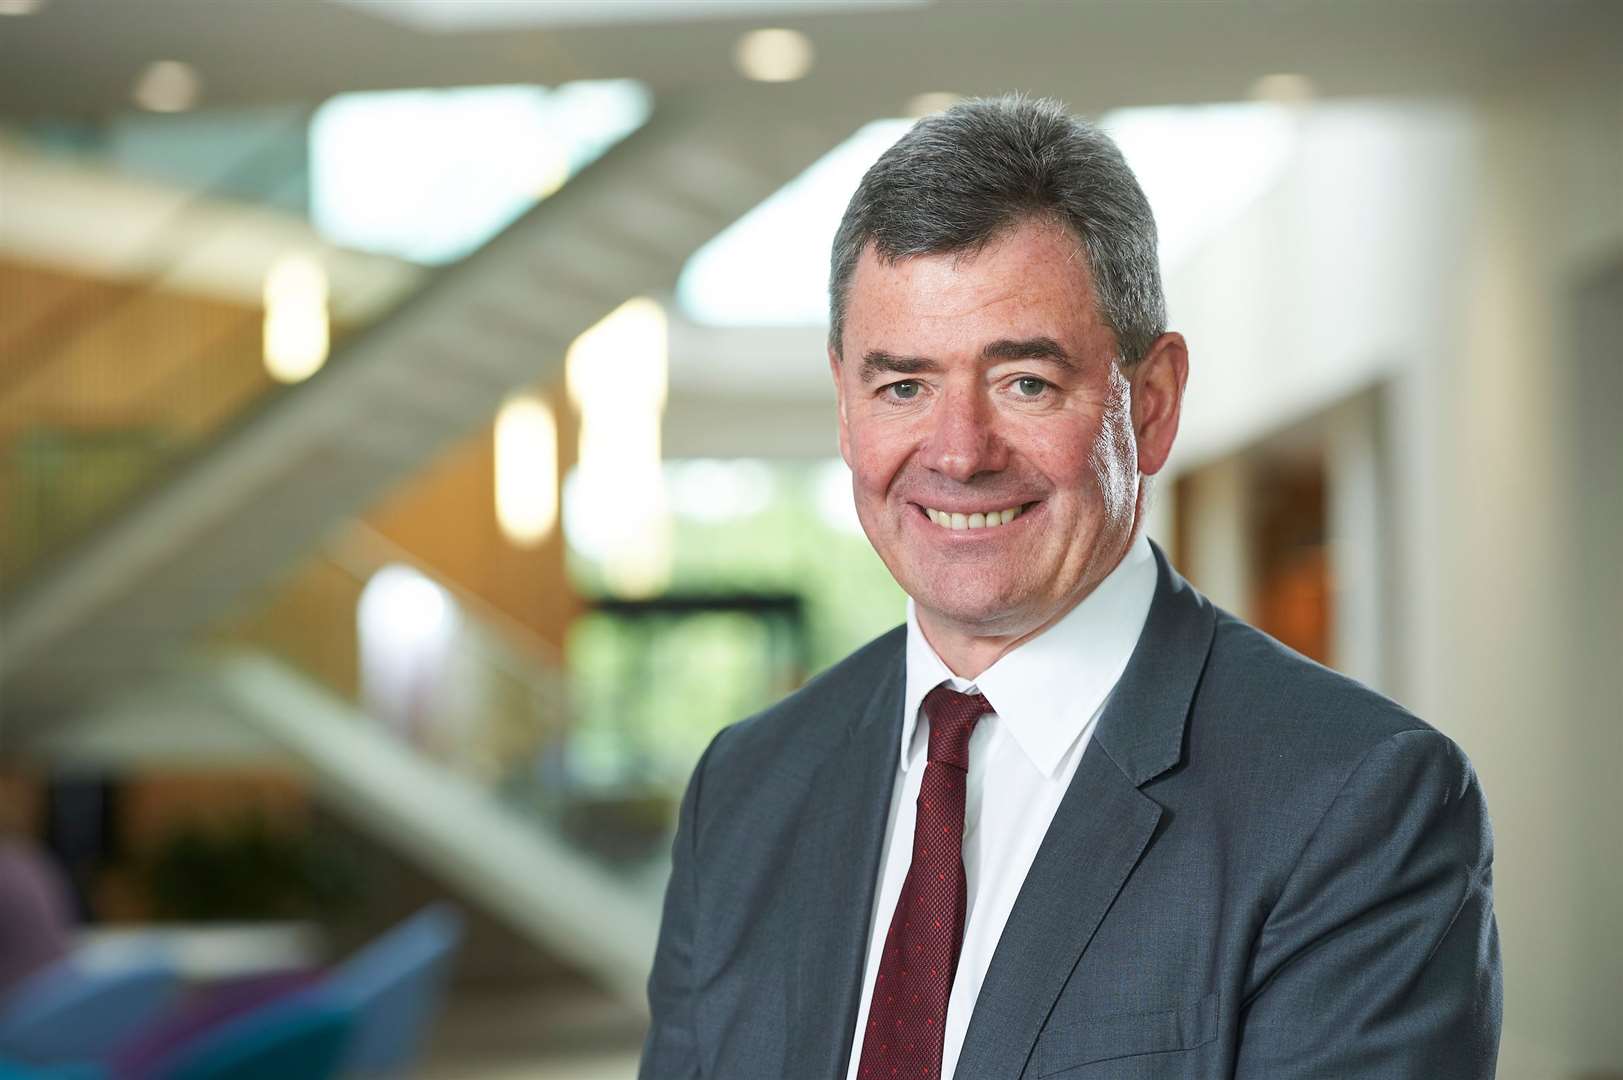 Professor Lorne Crerar has been chairman of HIE since 2012 and steps down next month.